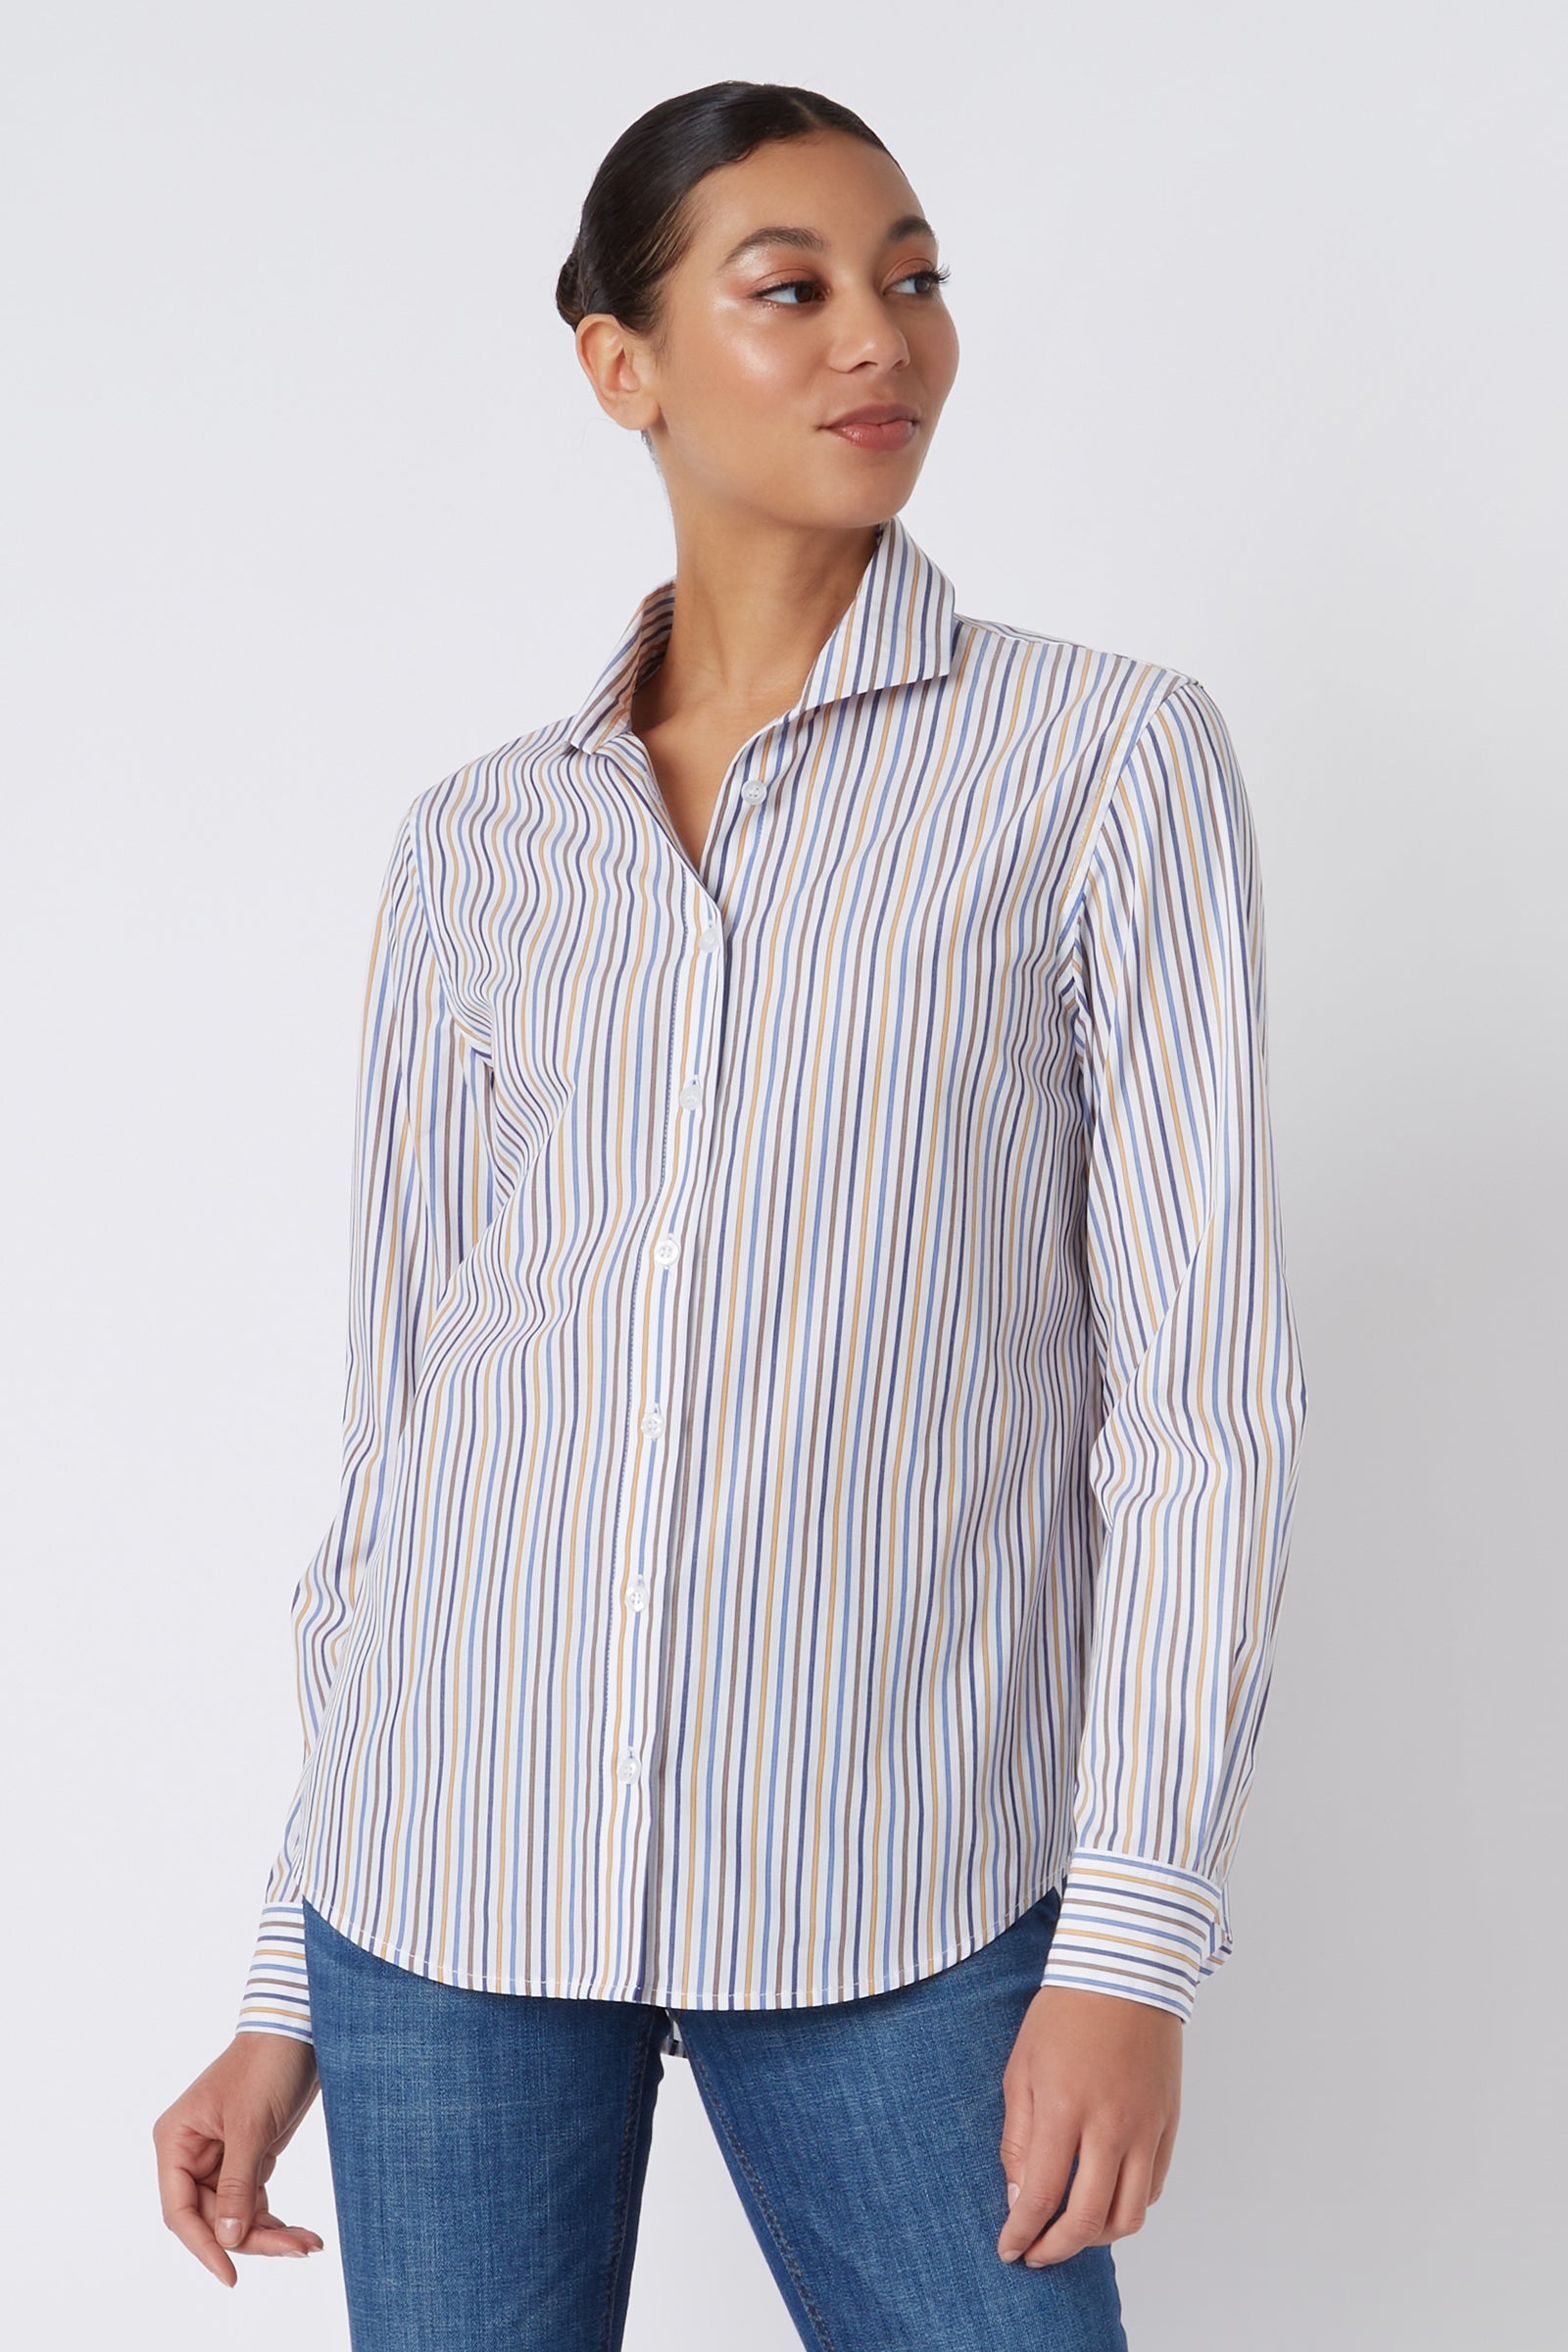 Kal Rieman Ginna Box Pleat Shirt in Multi Stripe Gold on Model Looking Left Cropped Front View